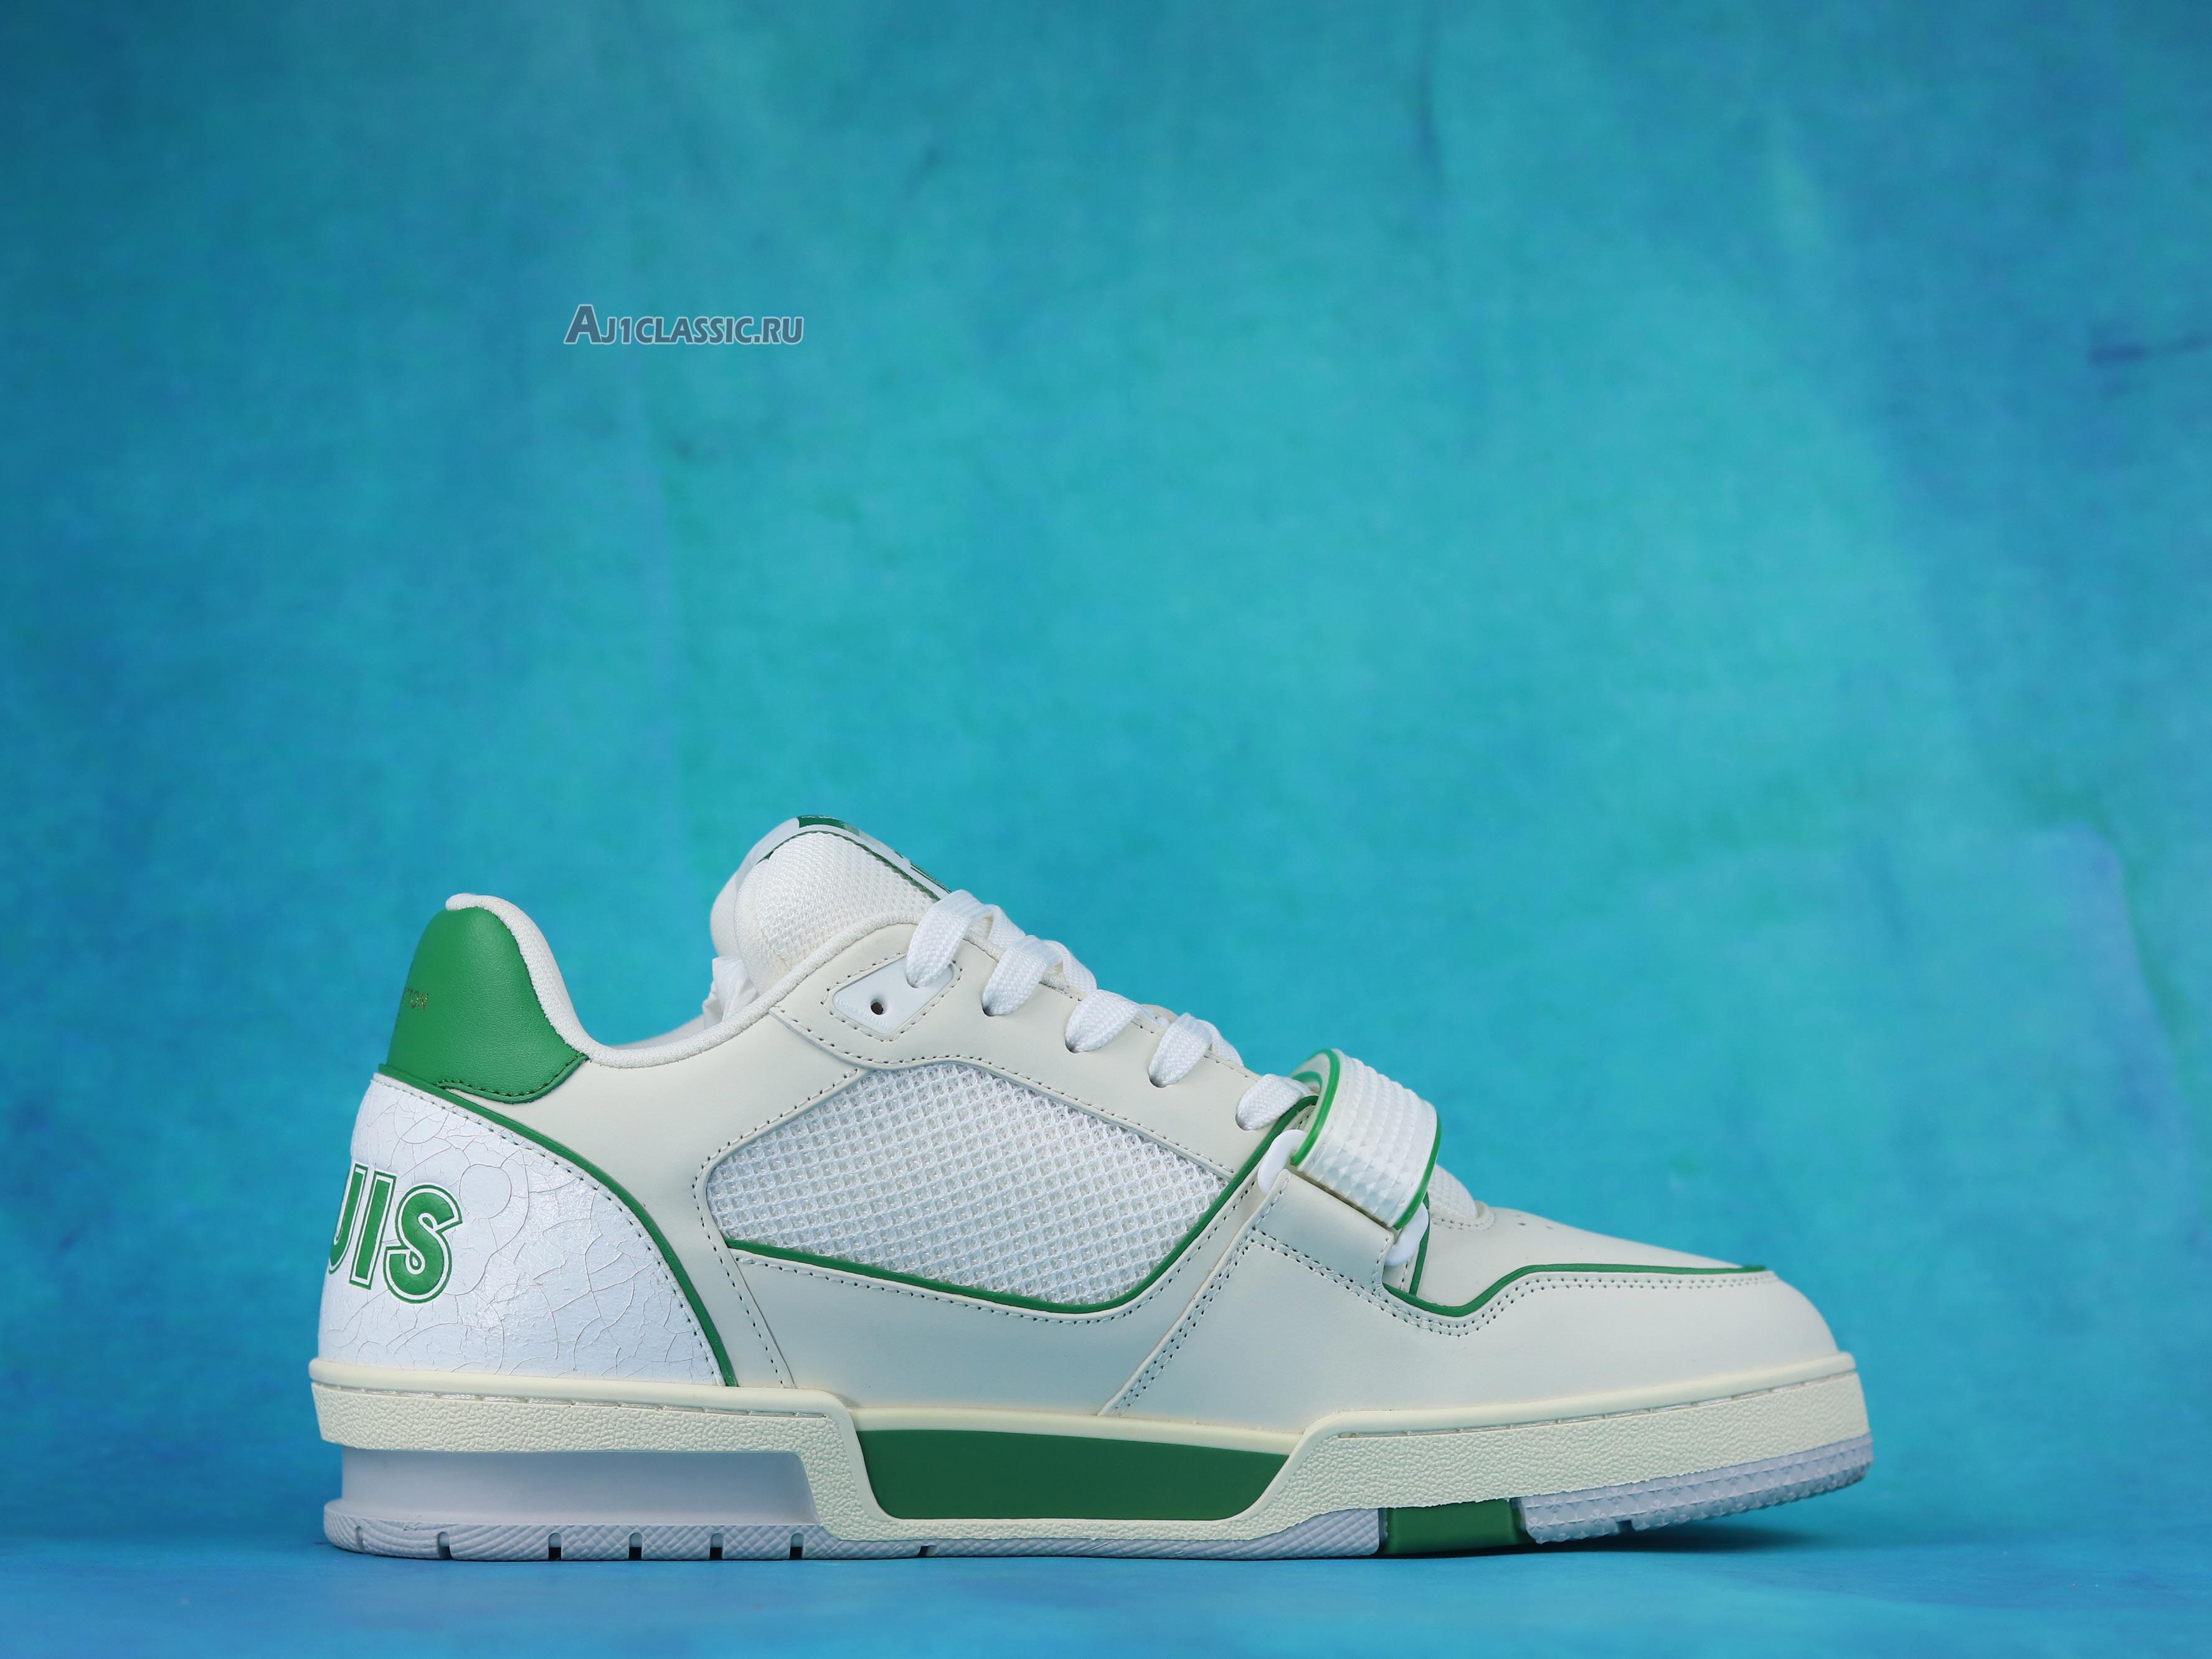 Louis Vuitton Trainer Low "Green Mesh" 1A98V1